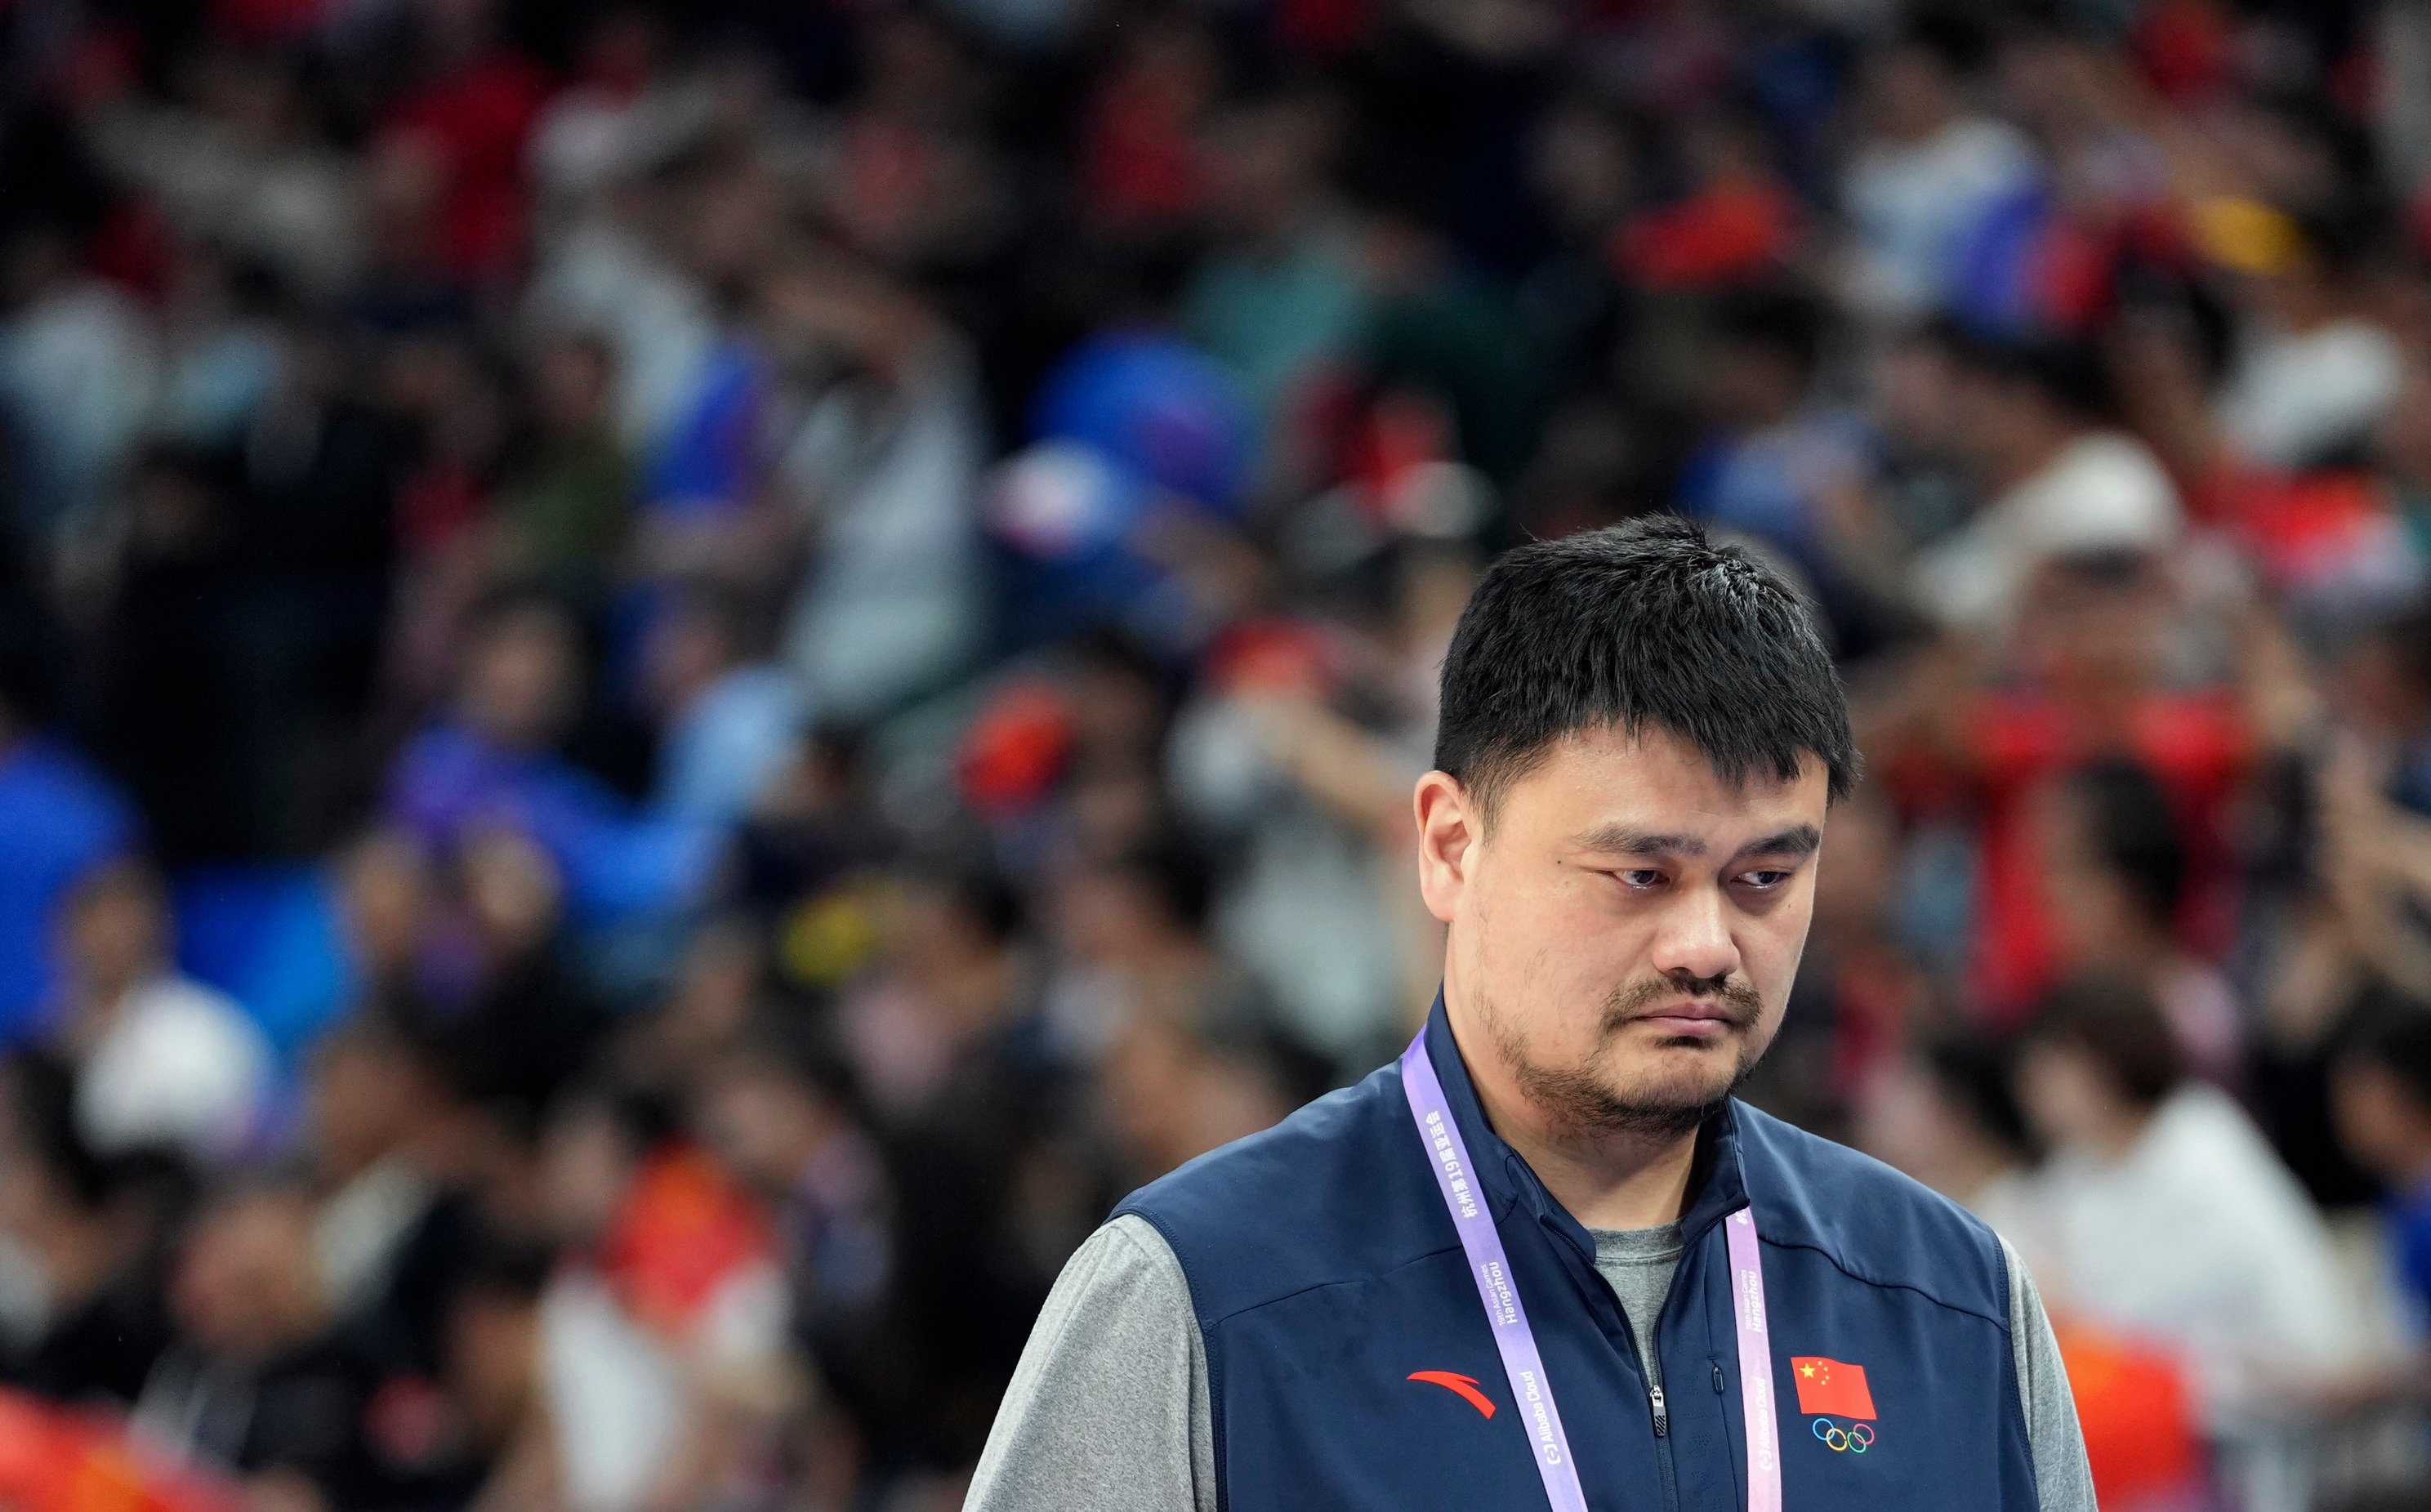 Chinese Basketball Association president Yao Ming watches the men’s bronze medal match at the Asian Games in Hangzhou. Photo: Xinhua